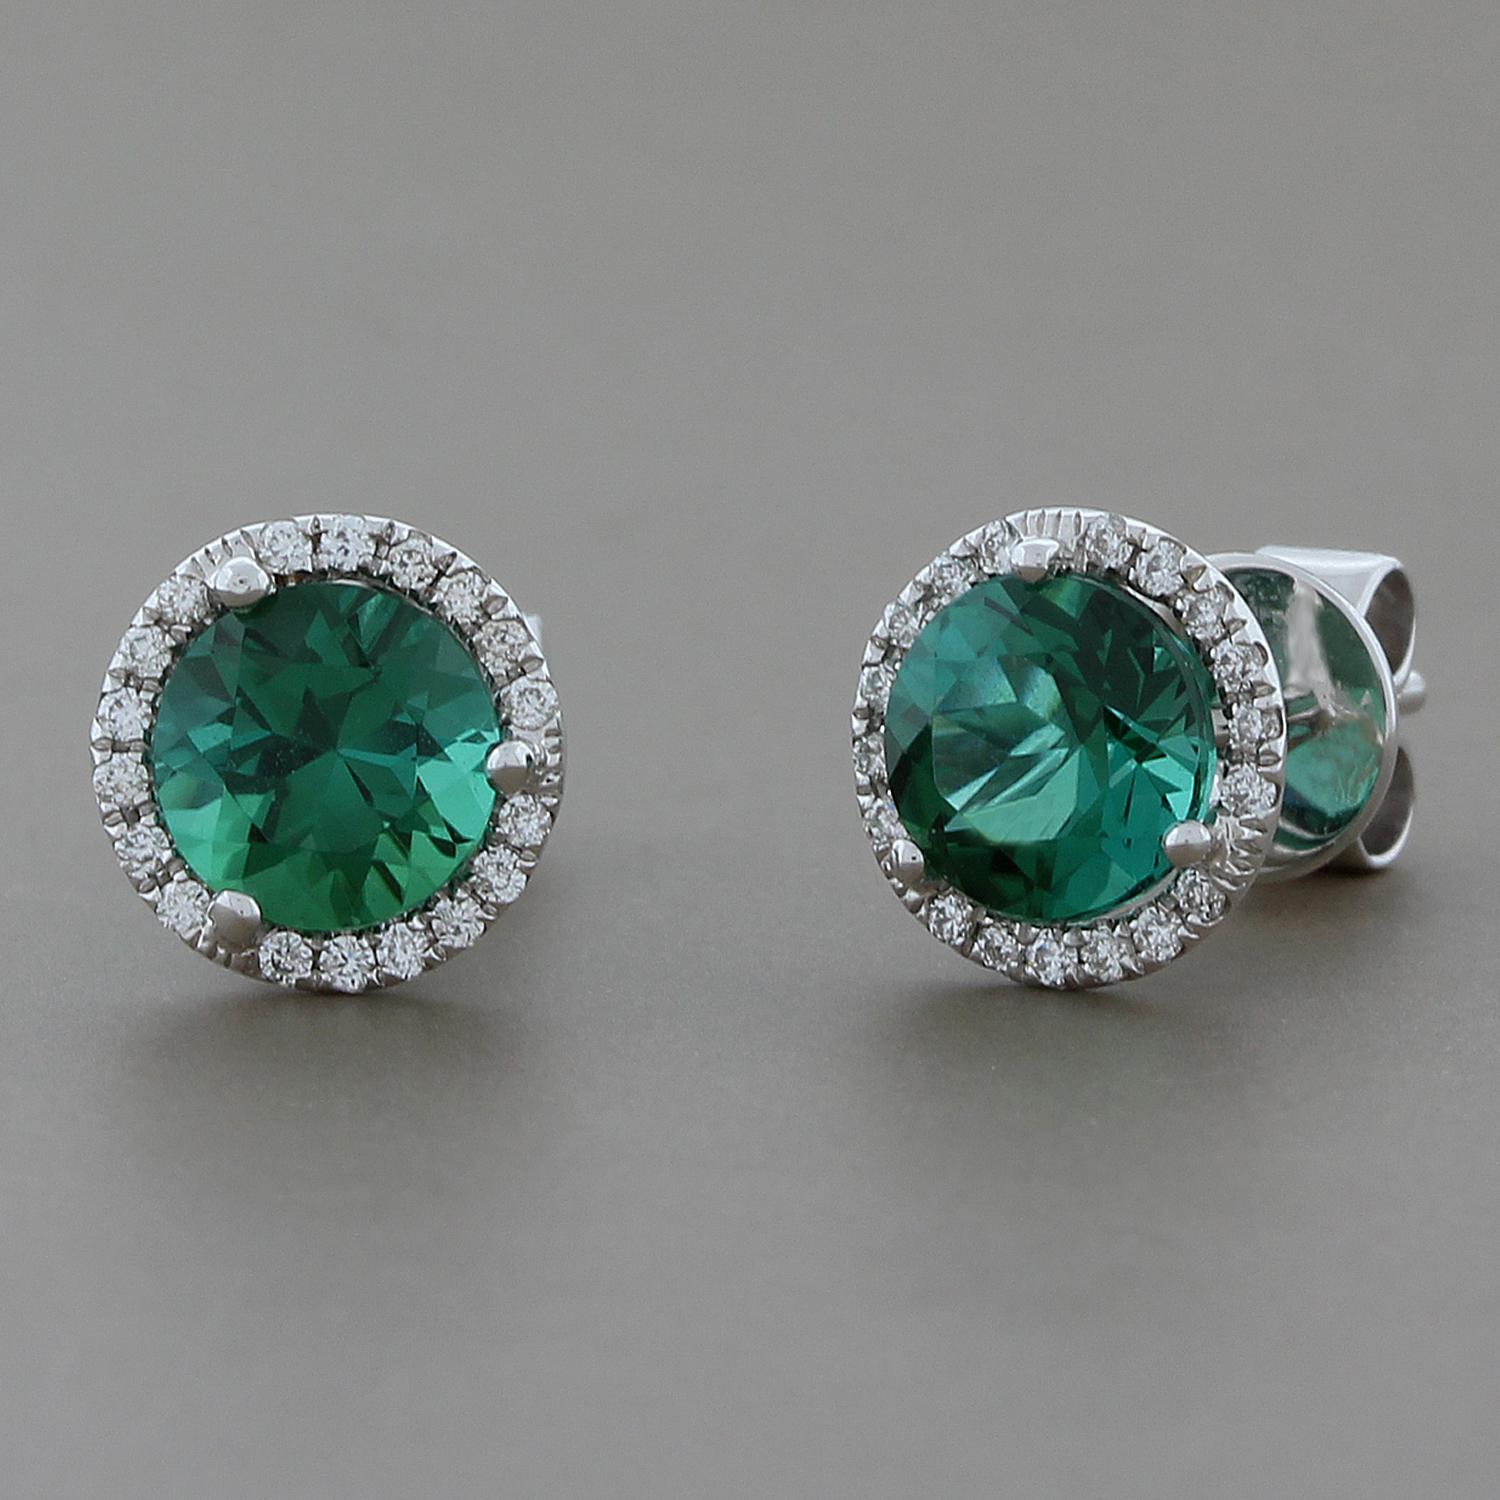 Green with envy! A perfect everyday stud earring featuring 1.88 carats of round green tourmaline earrings haloed by 0.16 carats of round white VS quality diamonds. Set in 18K white gold.

Approximately, 8 mm diameter
